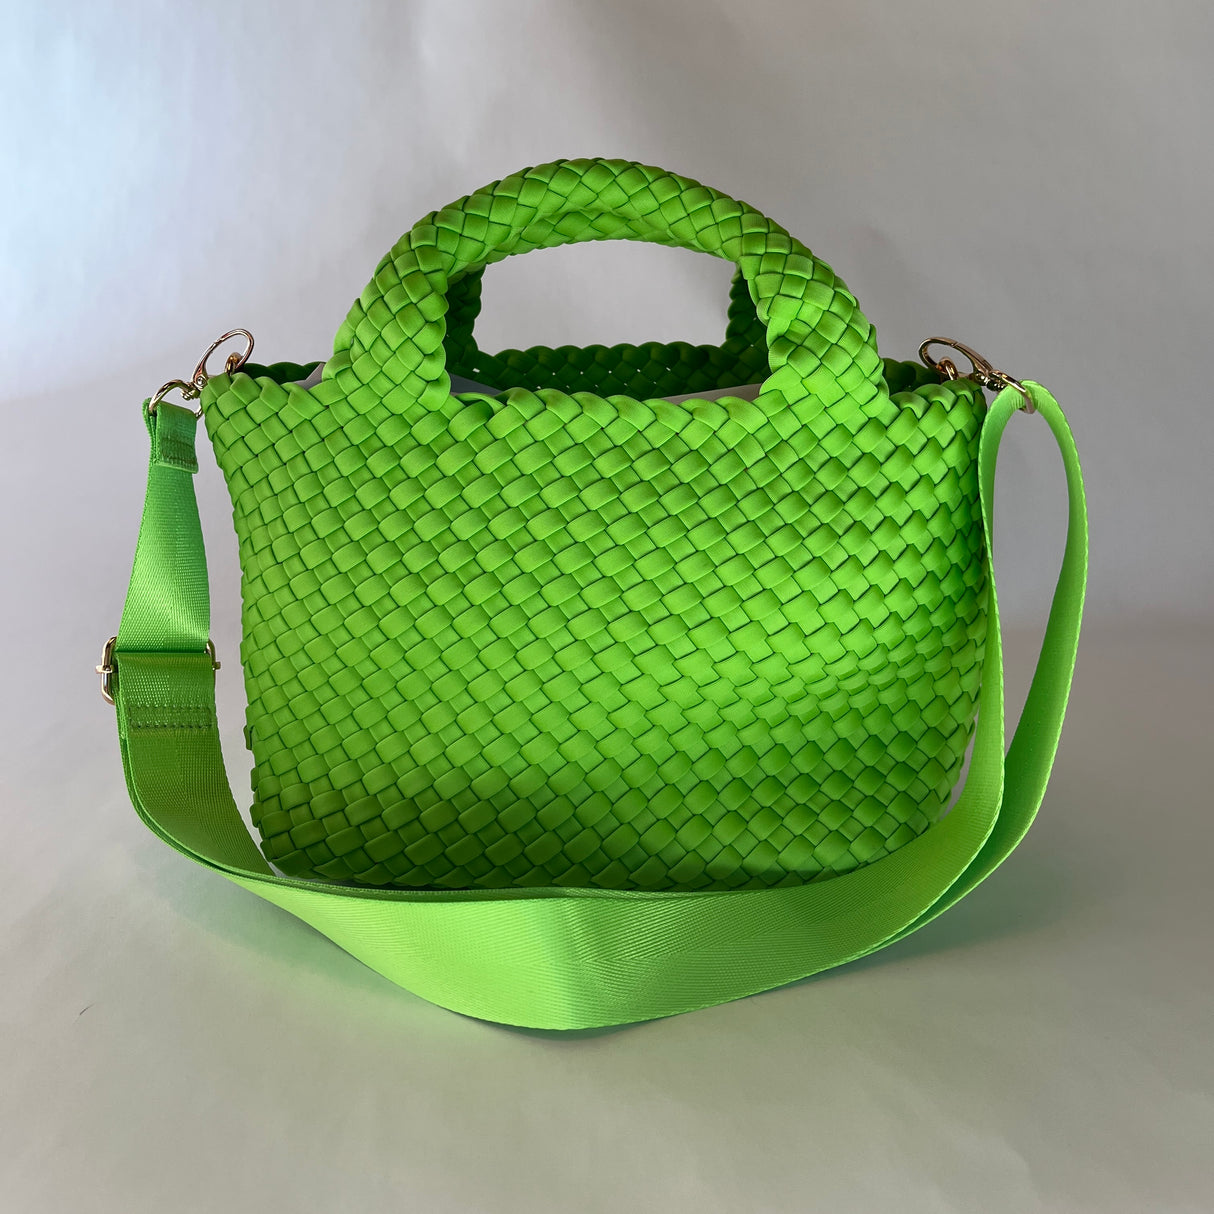 Woven Neoprene Lime Green Tote With Matching Solid Crossbody Strap